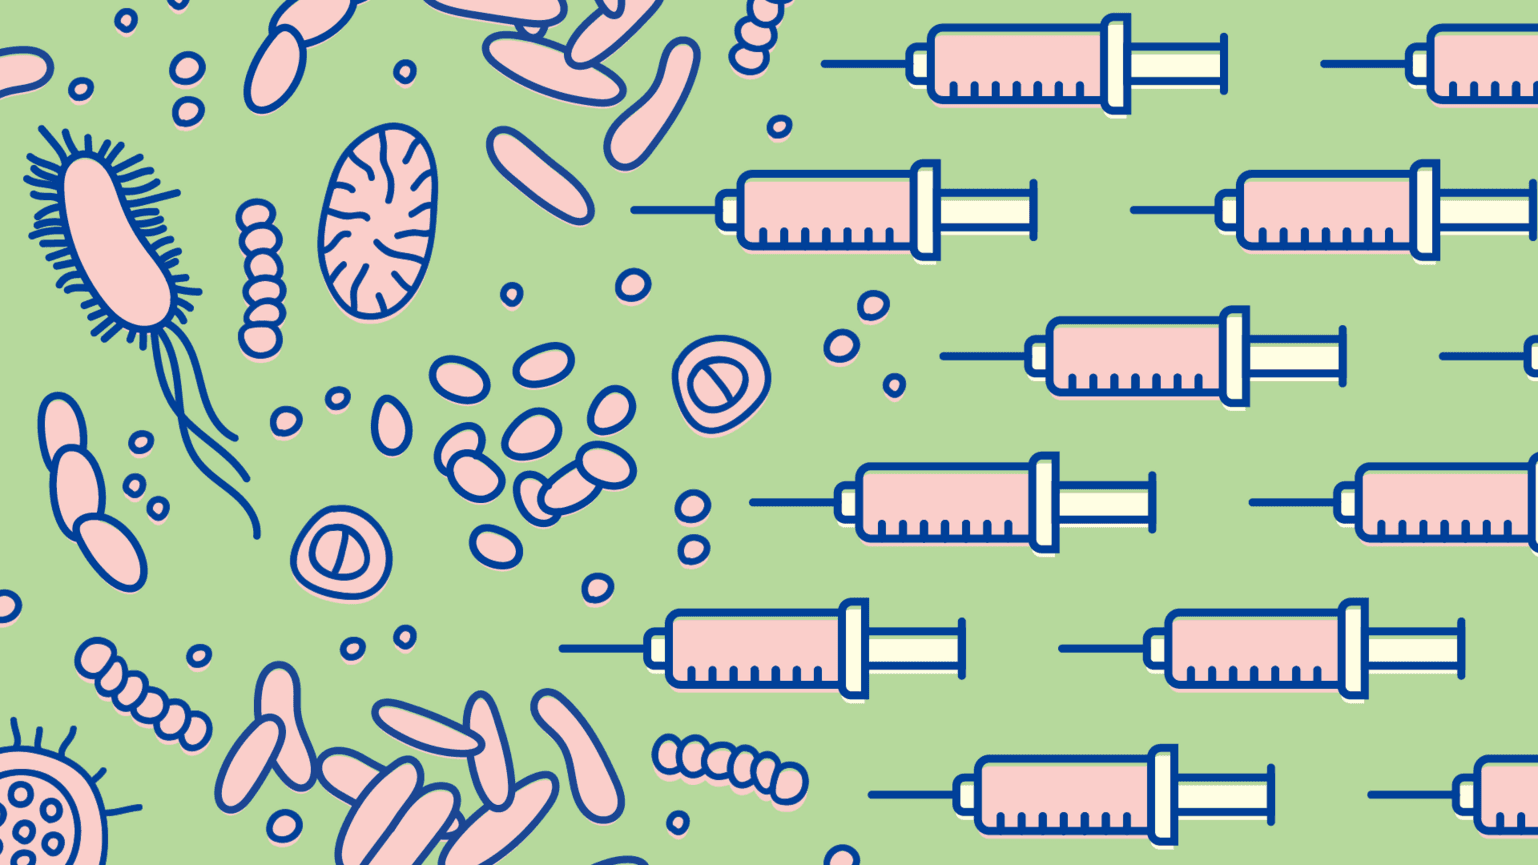 In a stylised illustration, several rows of illustrated vaccines close in on a group of cartoon microbes.